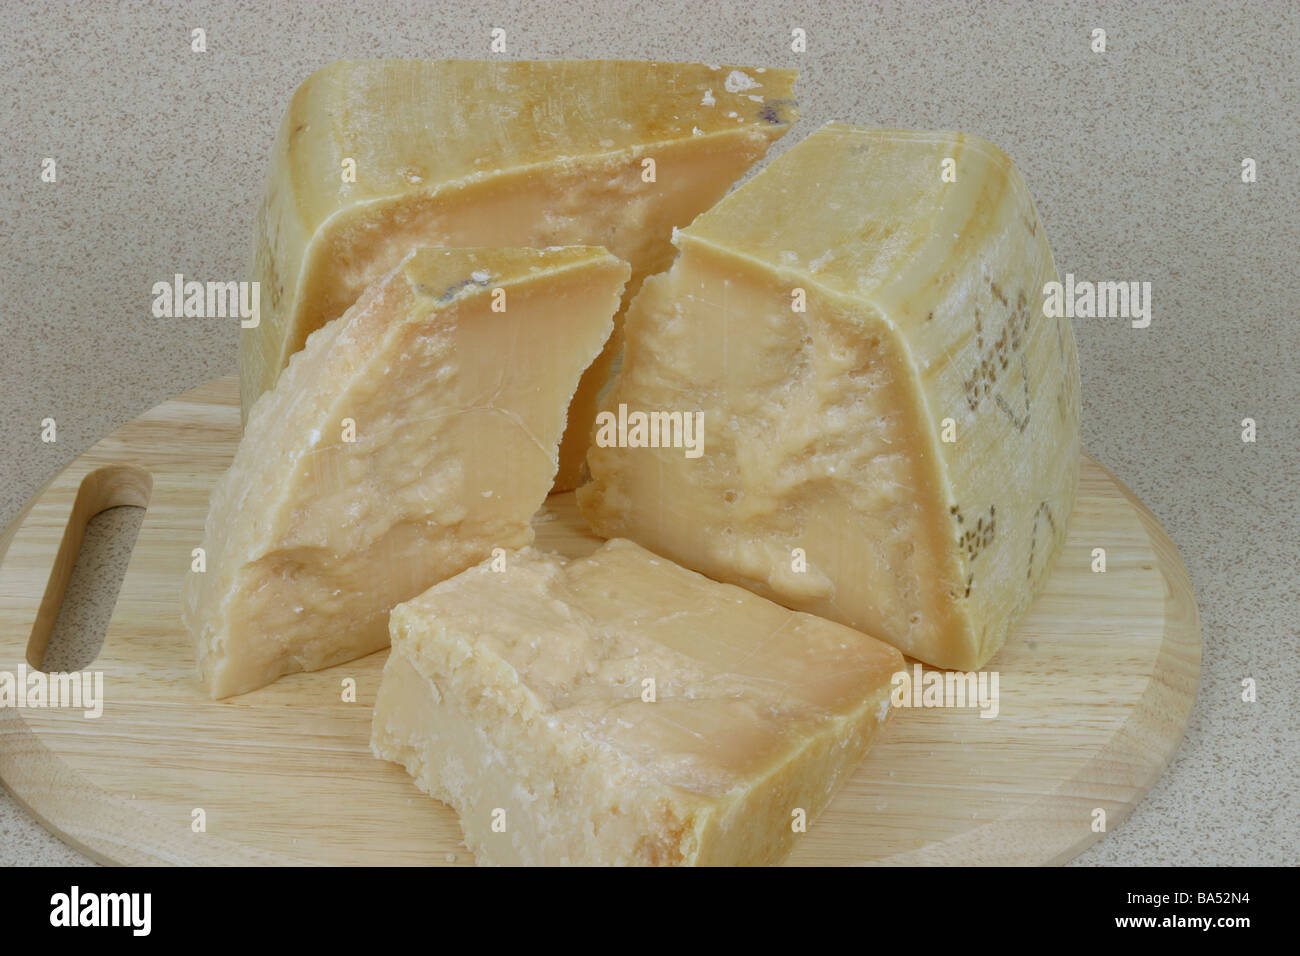 pieces of Parmesan cheese Stock Photo